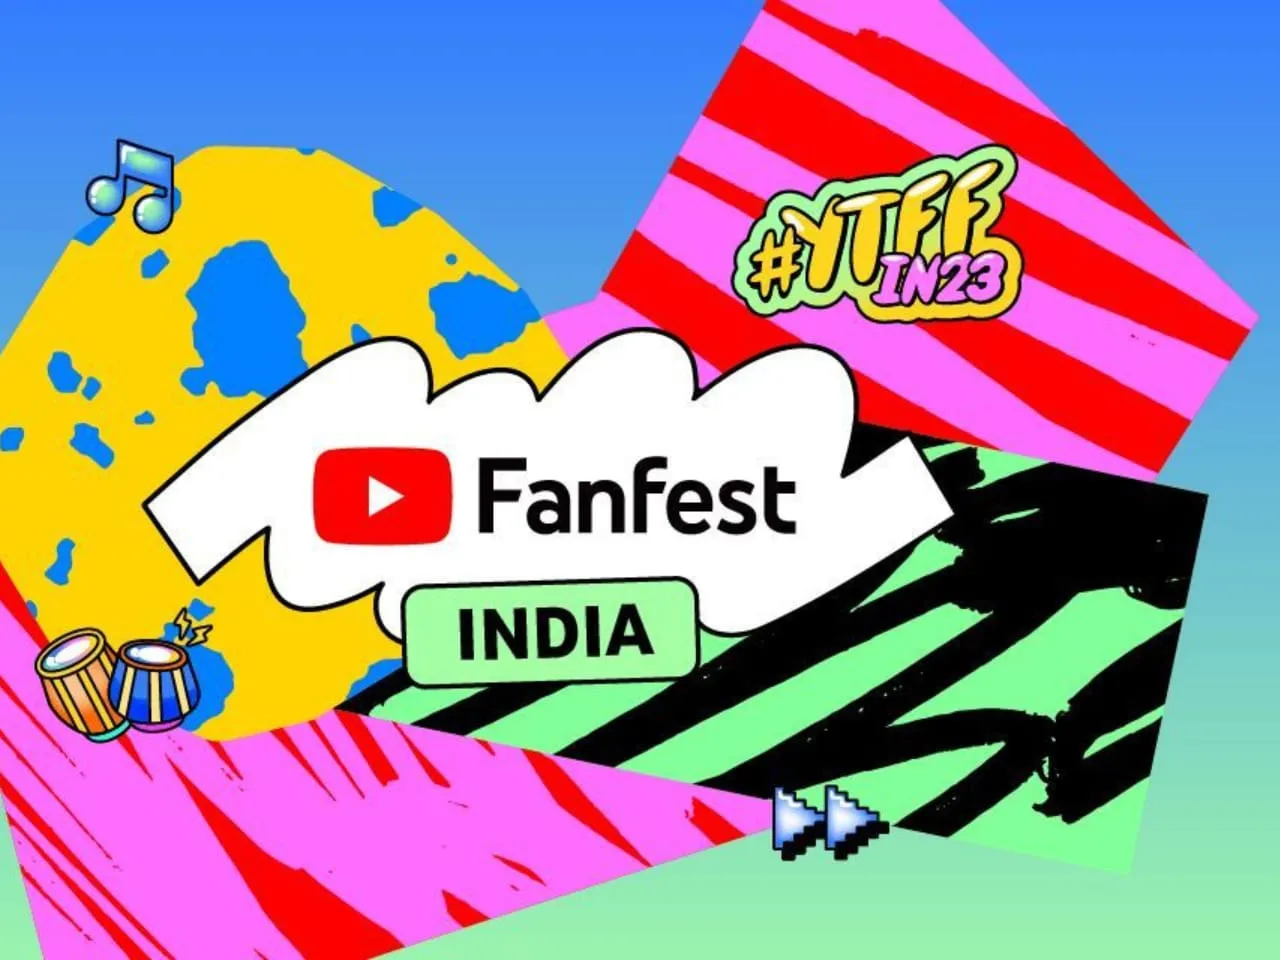 More than 5000 fans, creators and artists celebrate YouTube Fanfest